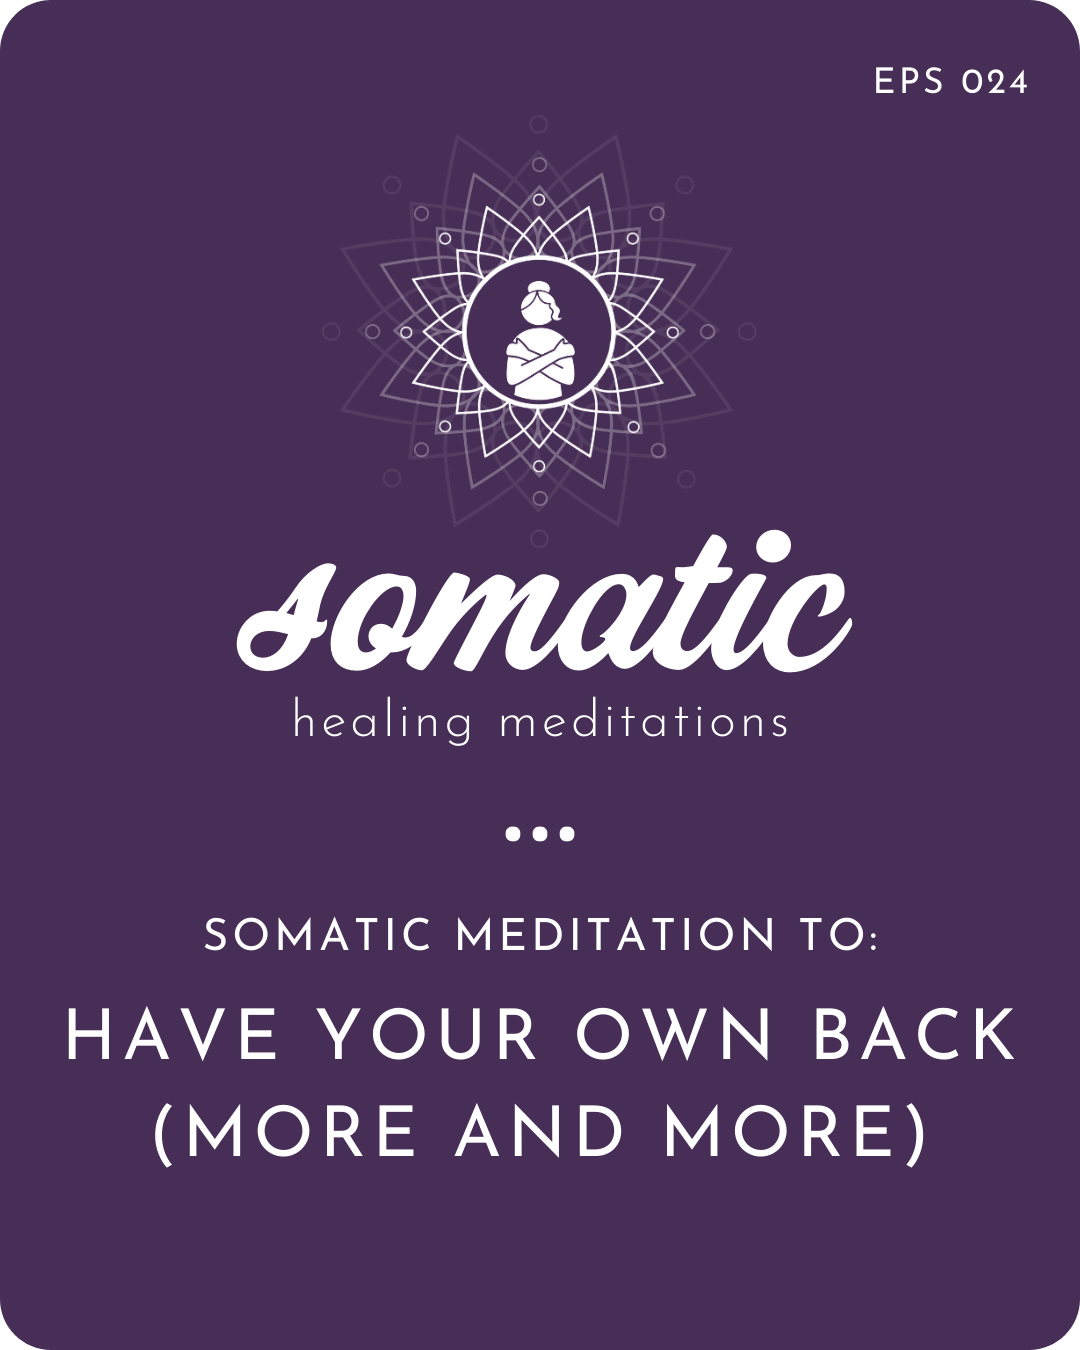 Somatic Meditation to Have Your Own Back (More and More)